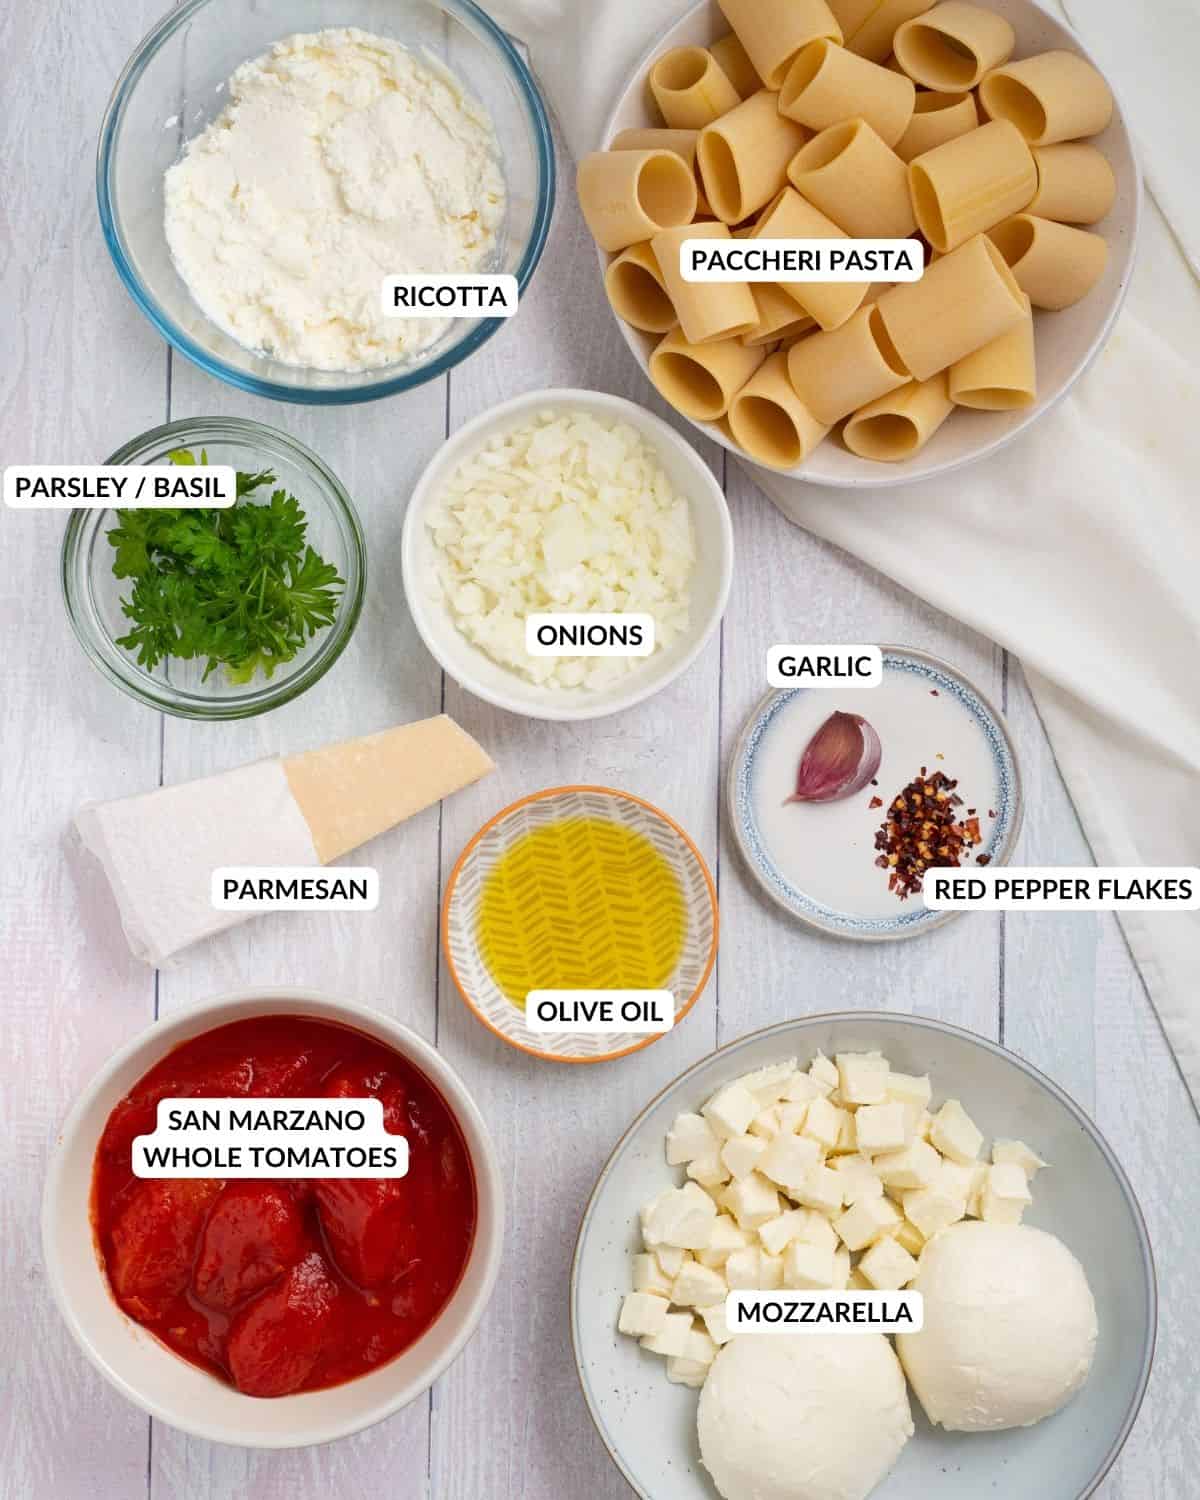 Overhead image of ingredients for paccheri al forno with labeled ingredients - check recipe card for details